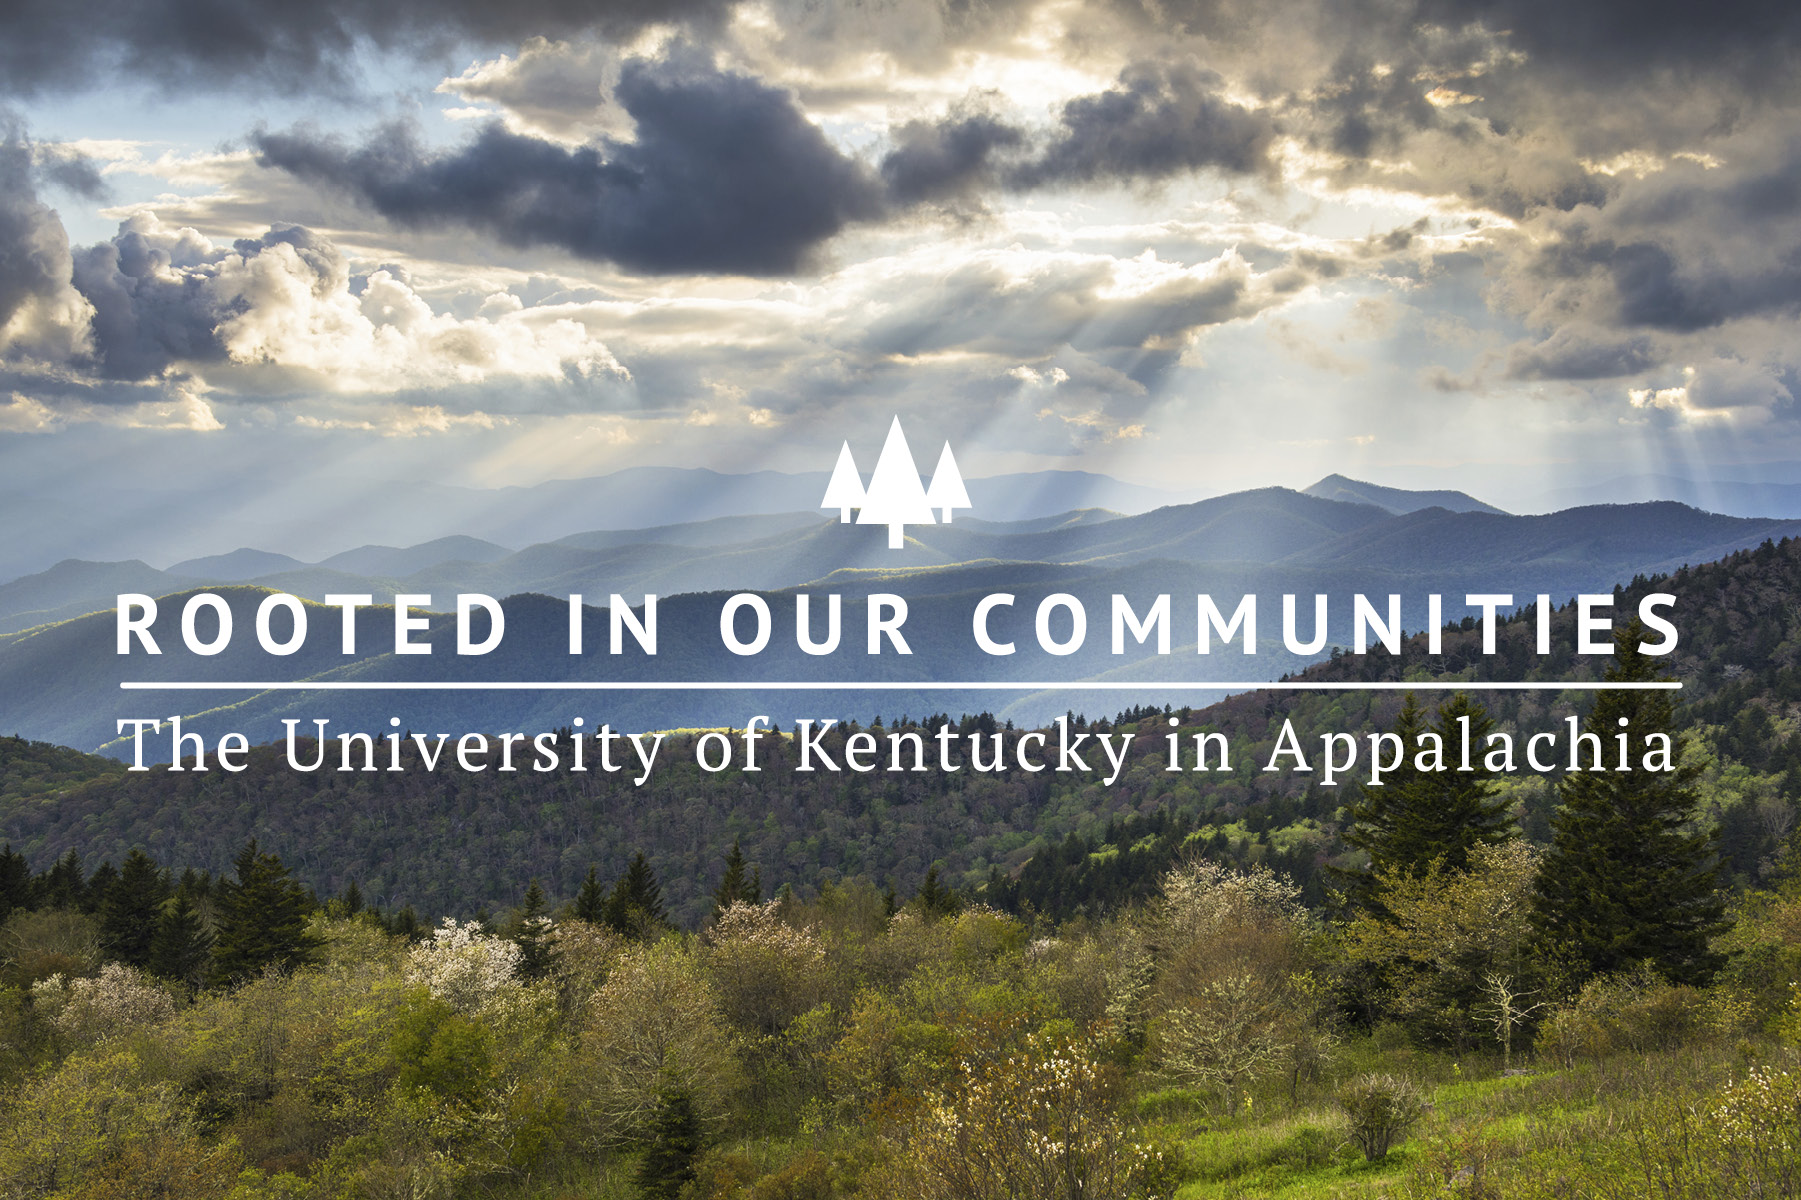 Rooted in Our Communities: The University of Kentucky in Appalachia